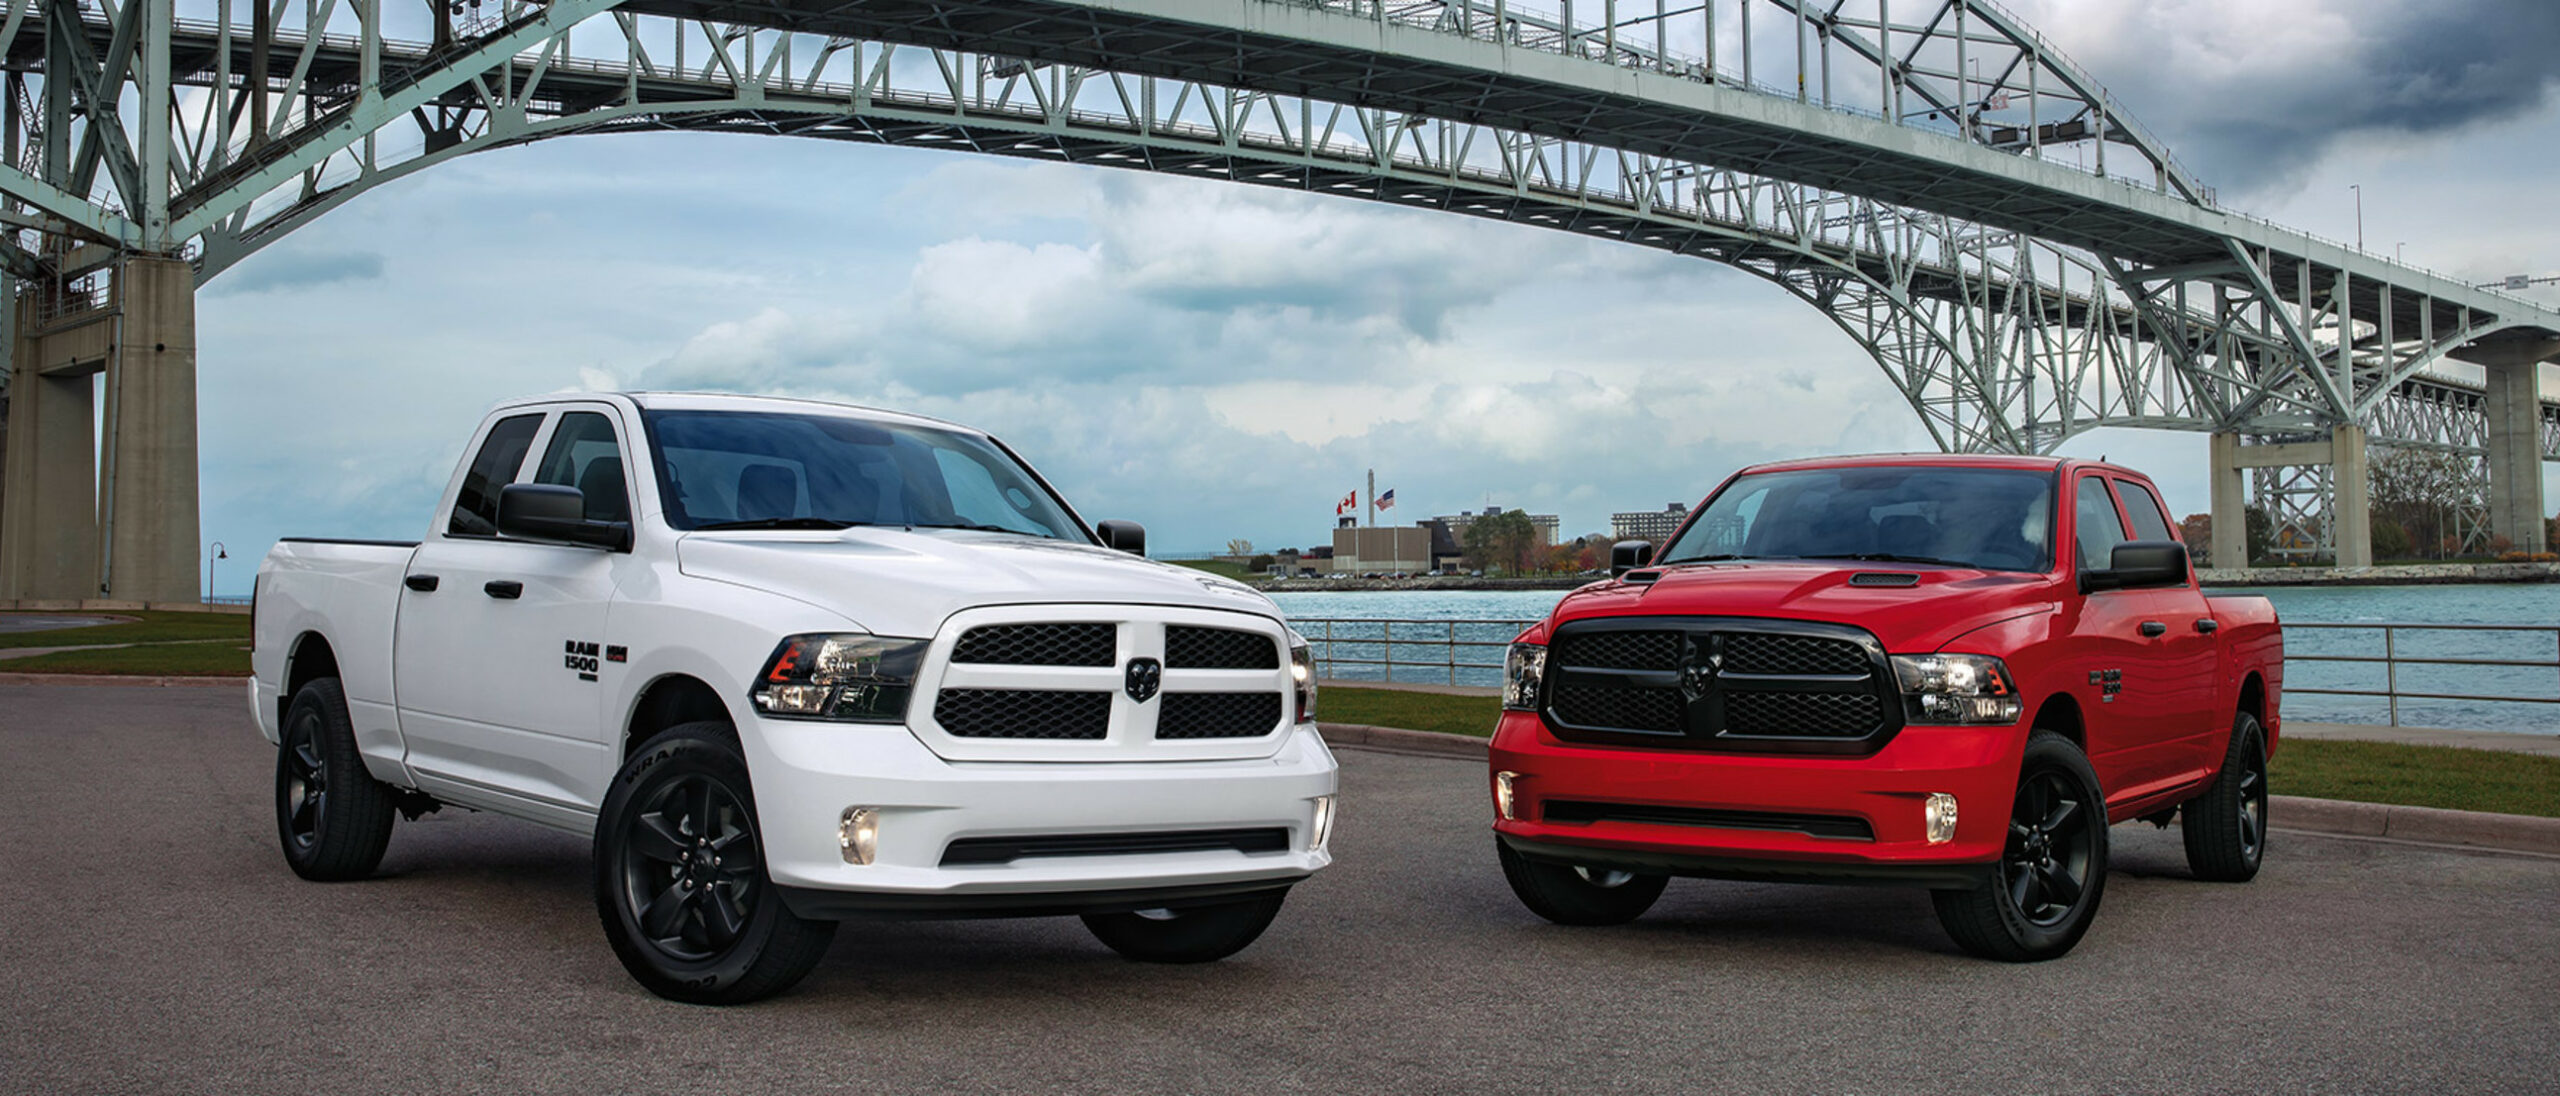 Ram 1500 Classic Returns For 2022 With These Changes: - MoparInsiders